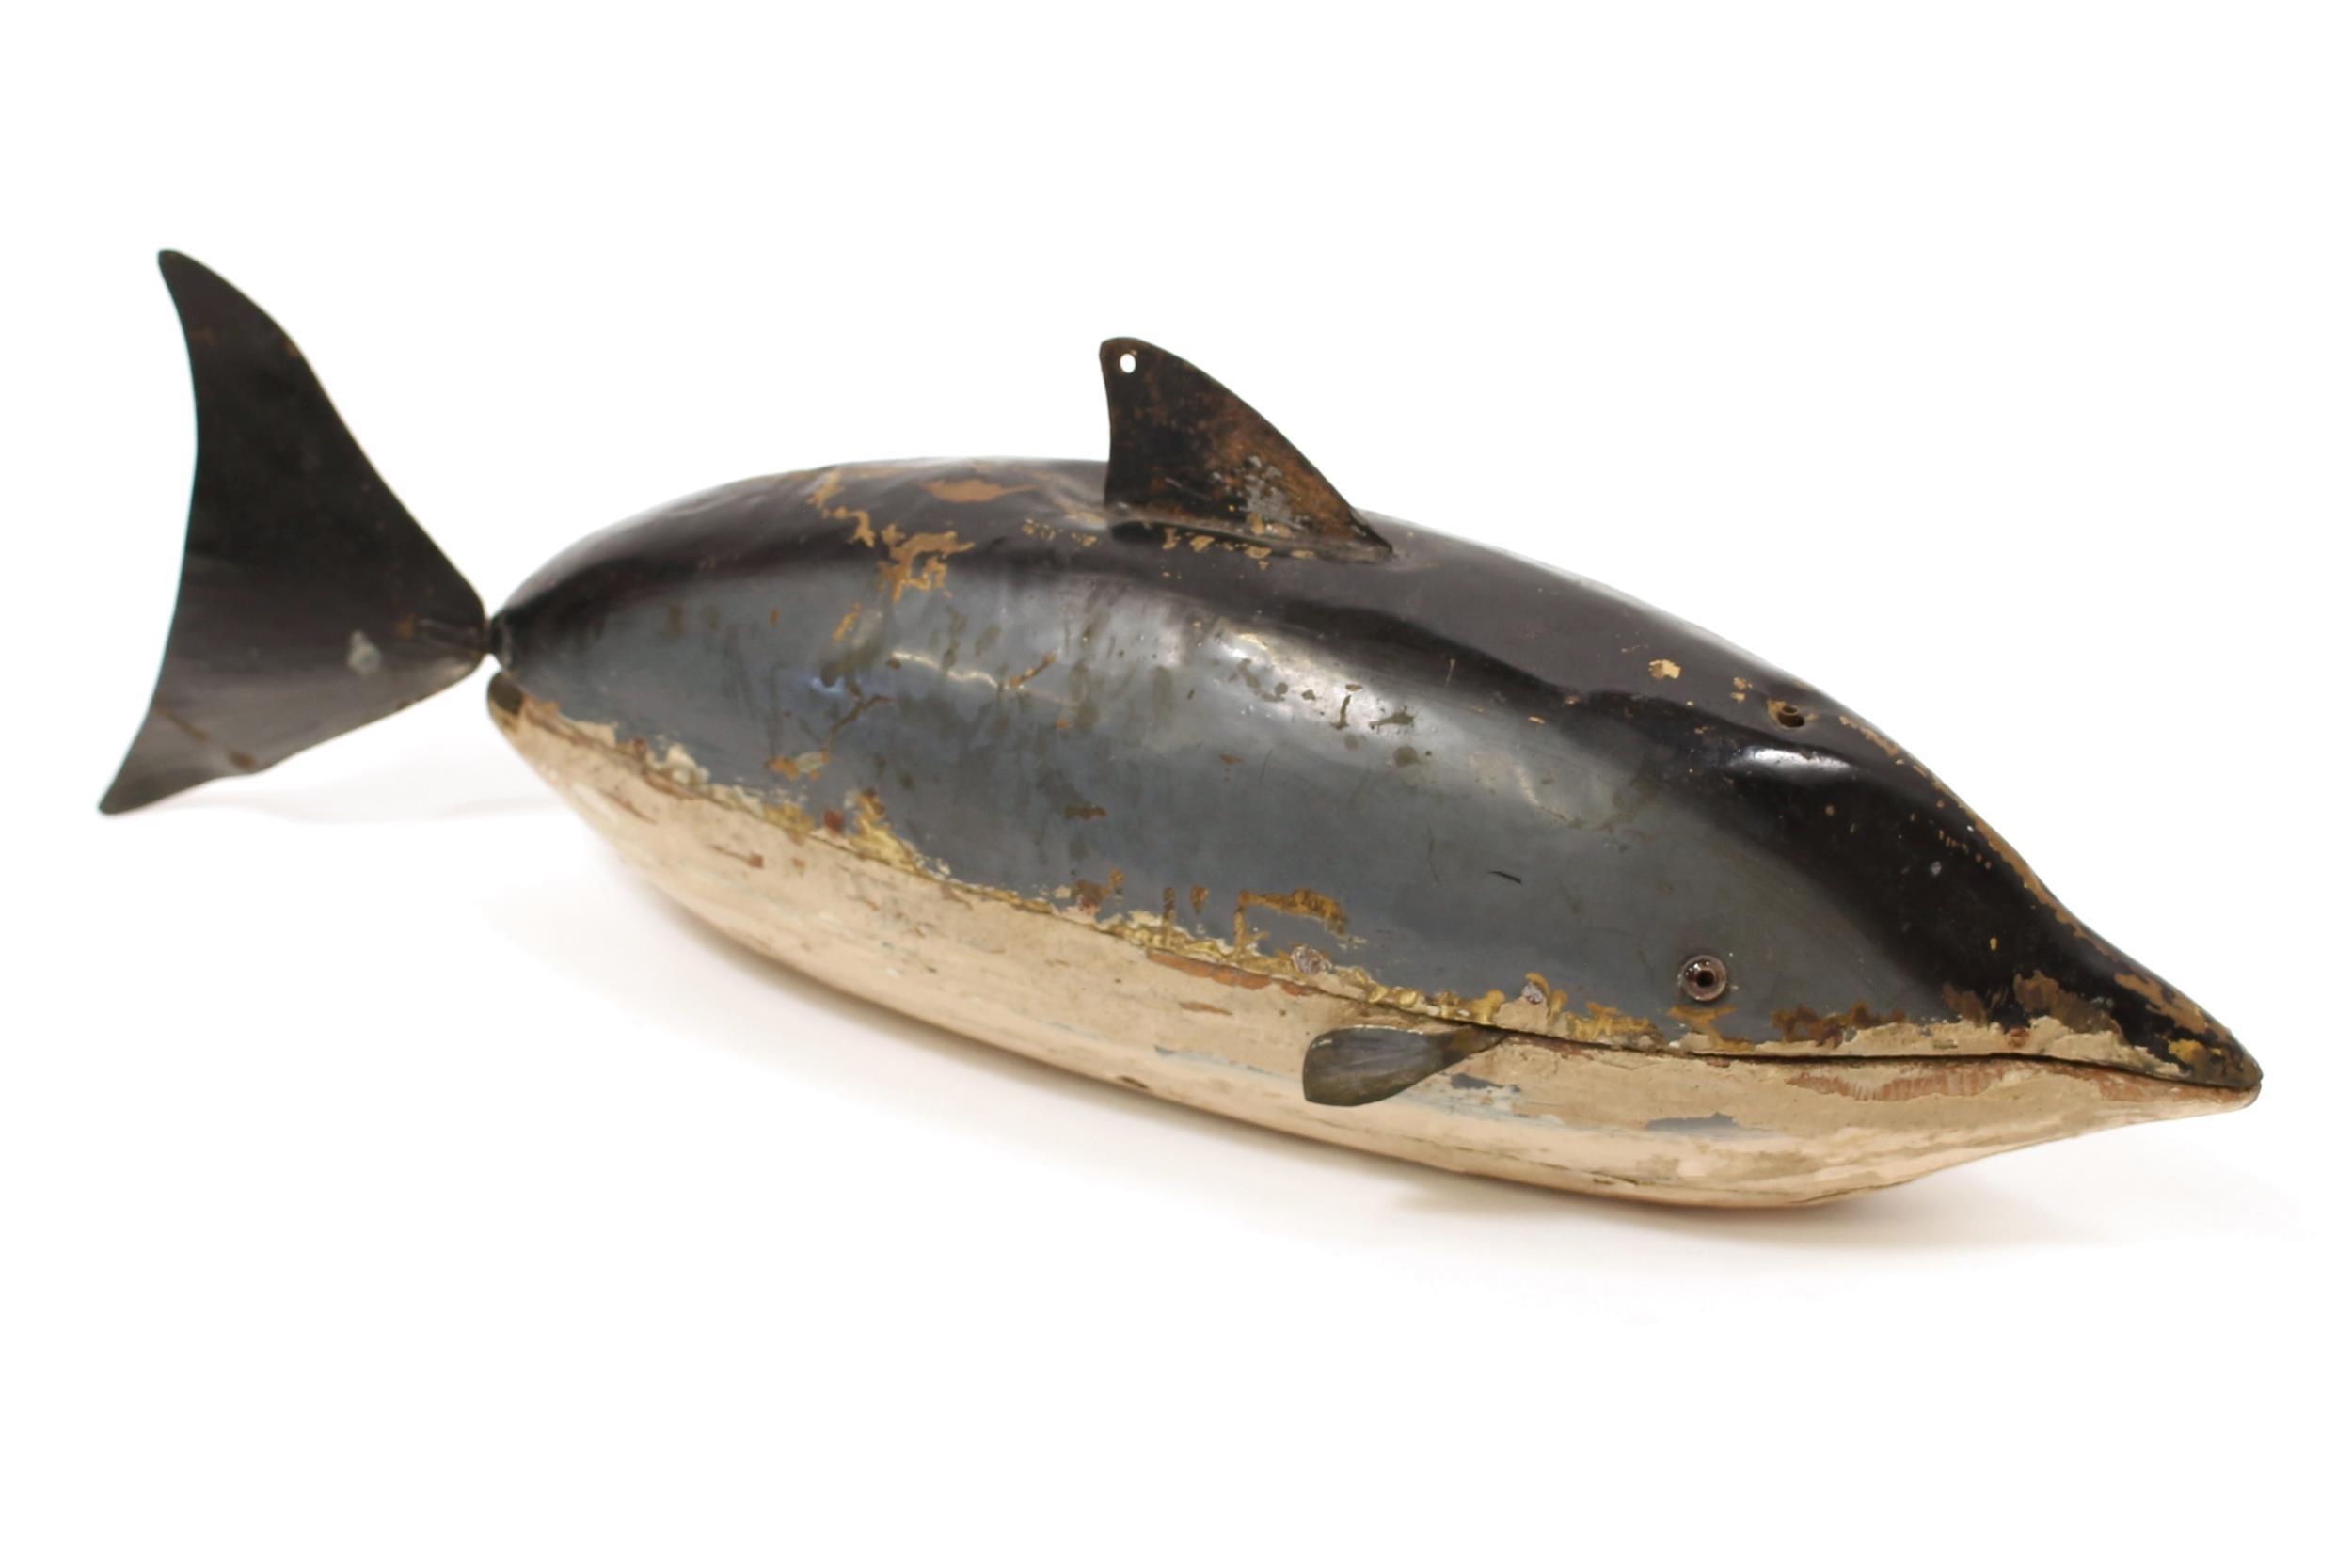 Folk Art & Automata - a rare early 20th century swimming automaton toy, in the form of a Porpoise, - Image 3 of 6